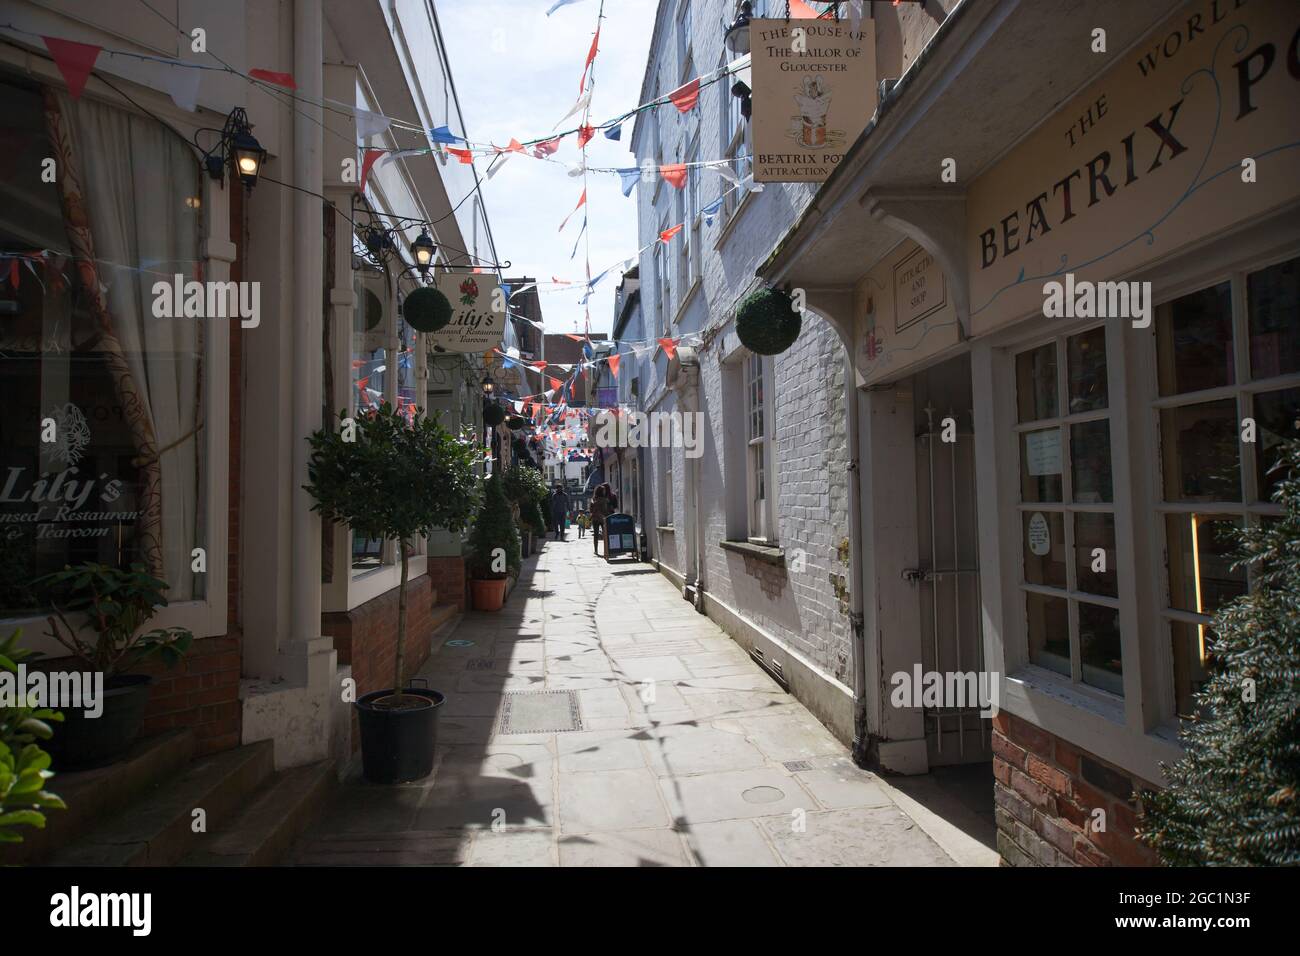 A narrow alleyway with small shops in Gloucester in the United Kingdom Stock Photo